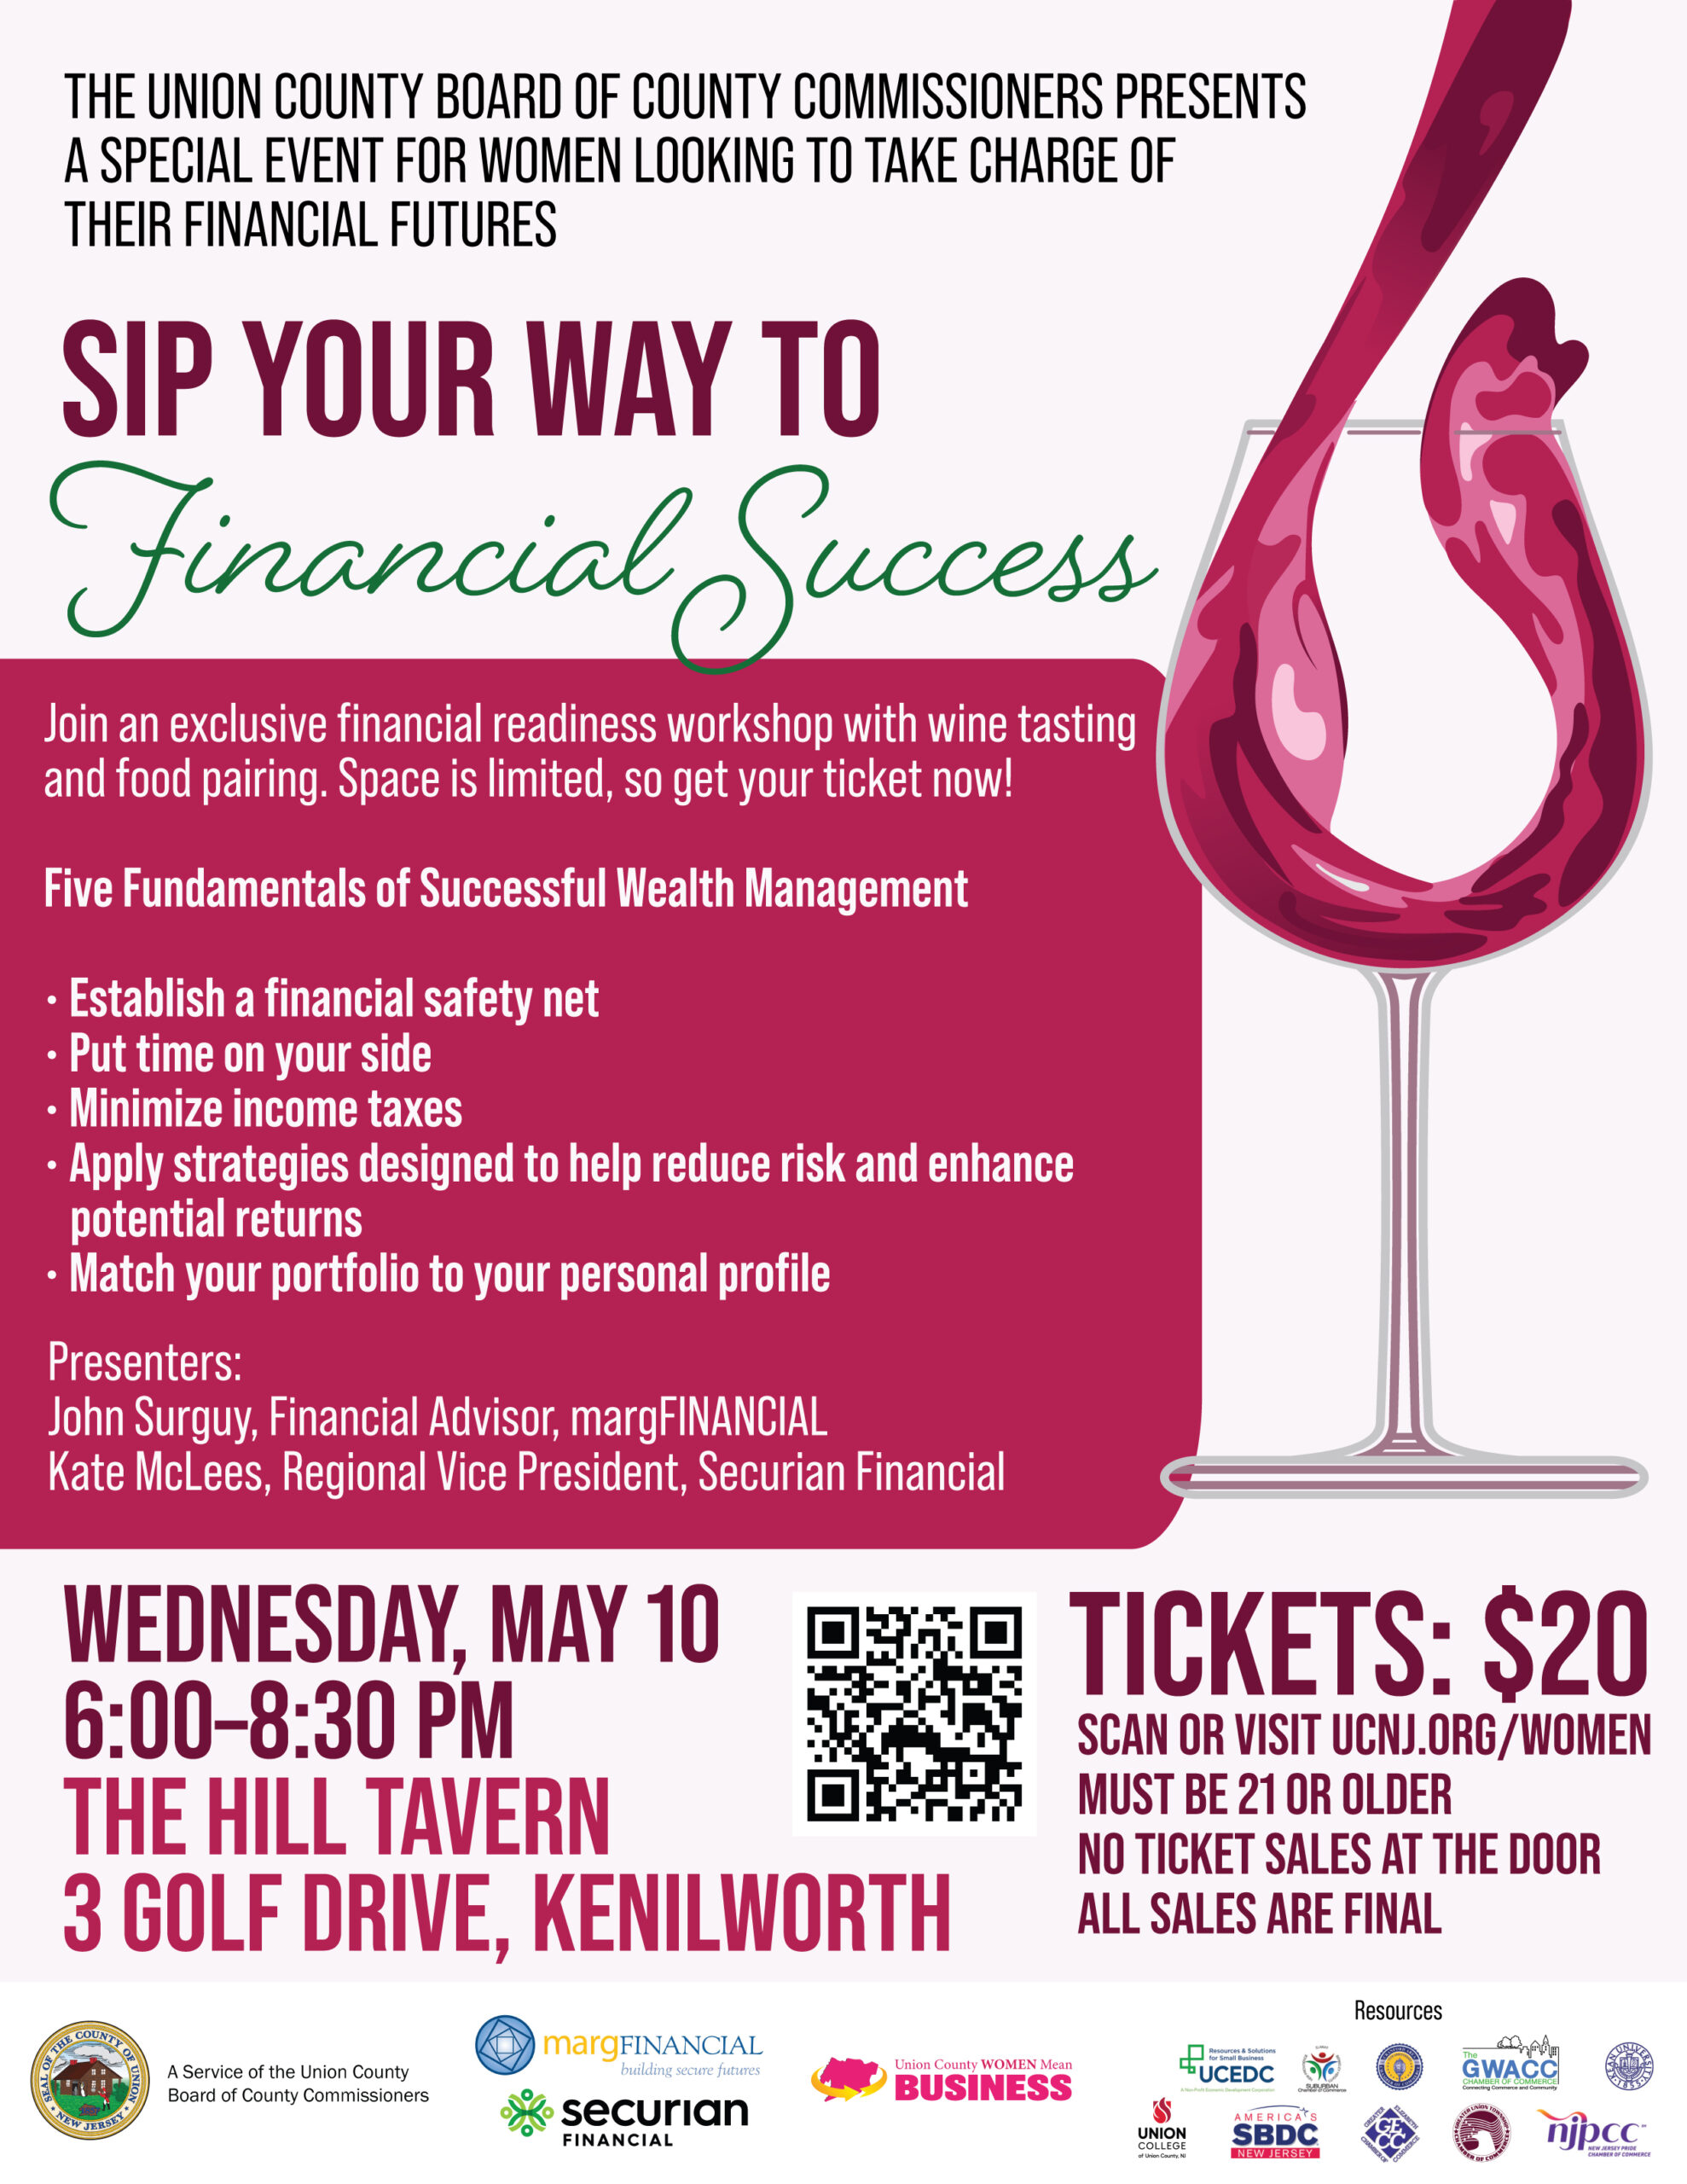 sip your way to financial success flyer